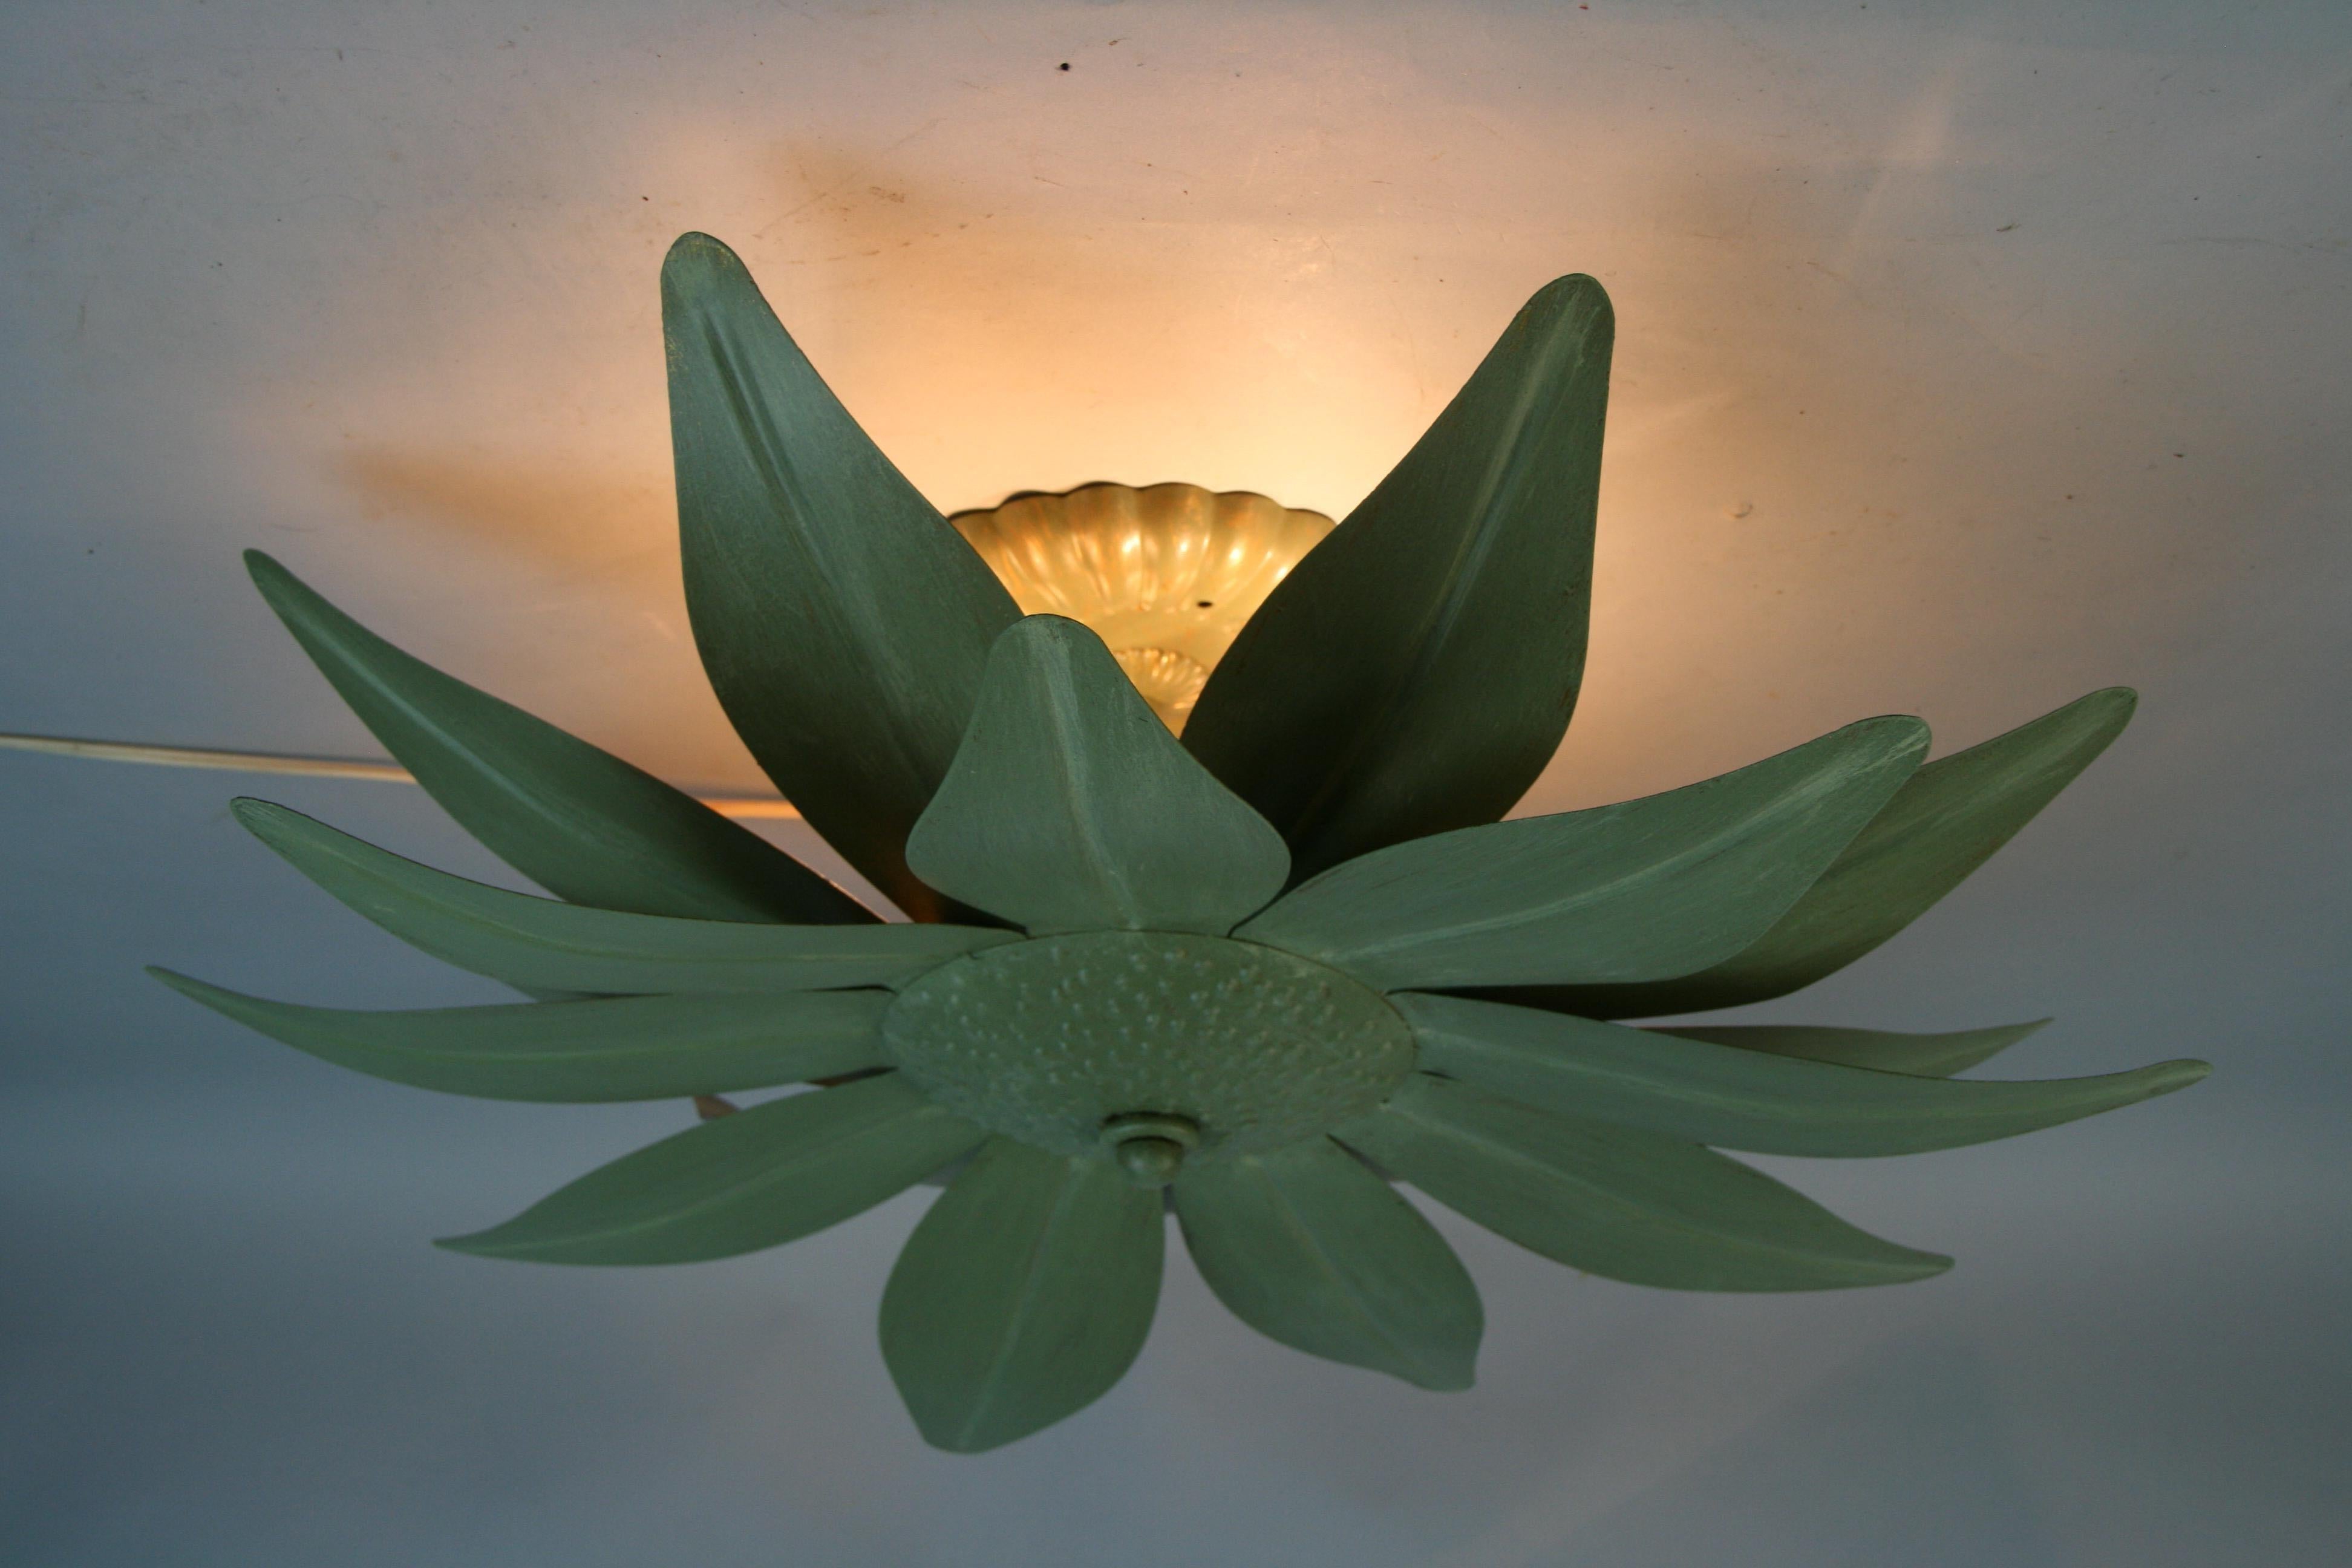 1410 Tole green leave 3 light flush mount.
Back of leaves in gold to reflect the light on cieling.